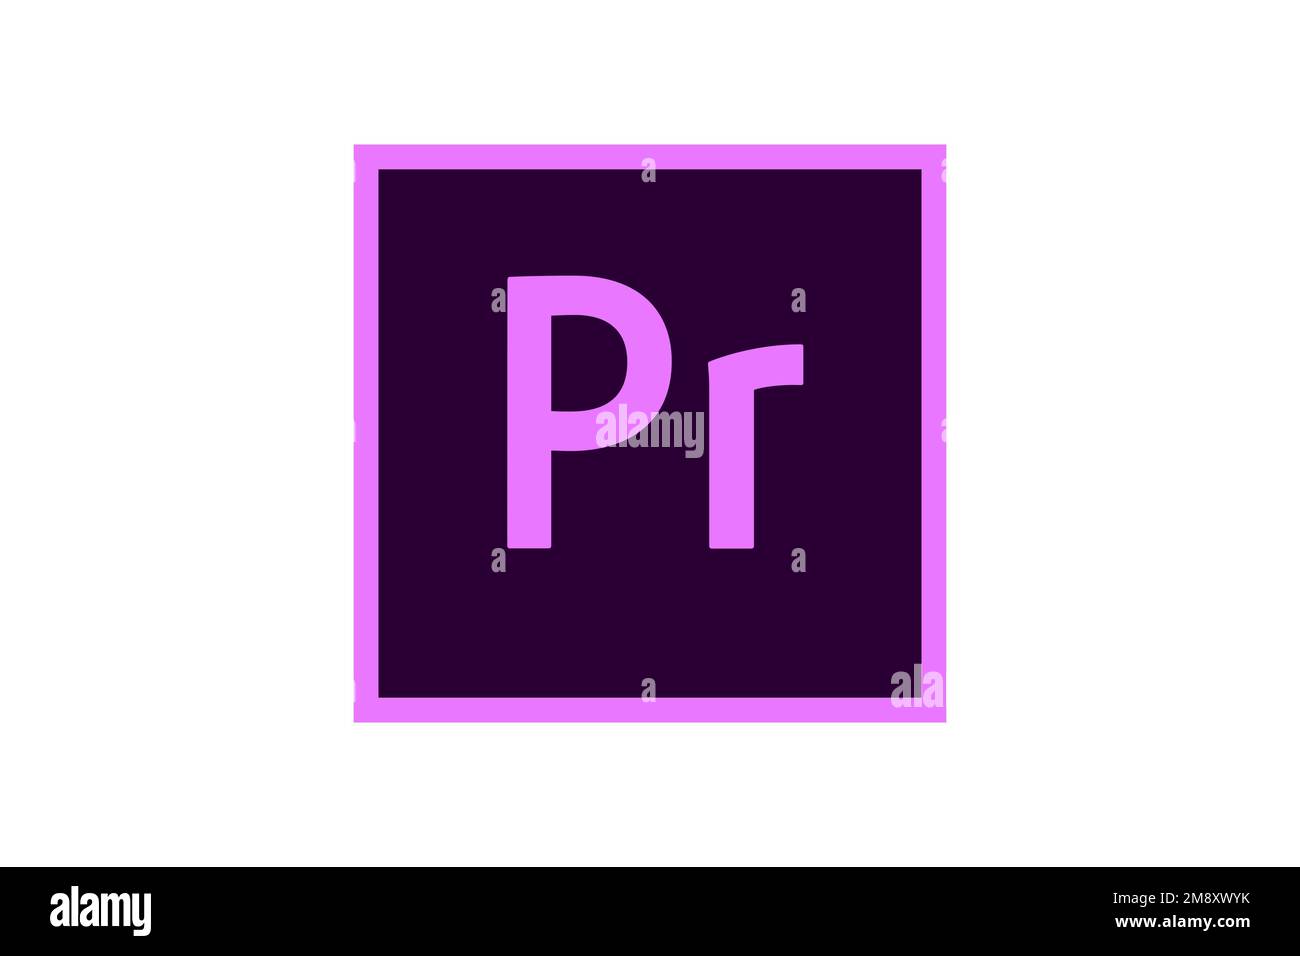 Adobe premiere pro logo Cut Out Stock Images & Pictures - Alamy